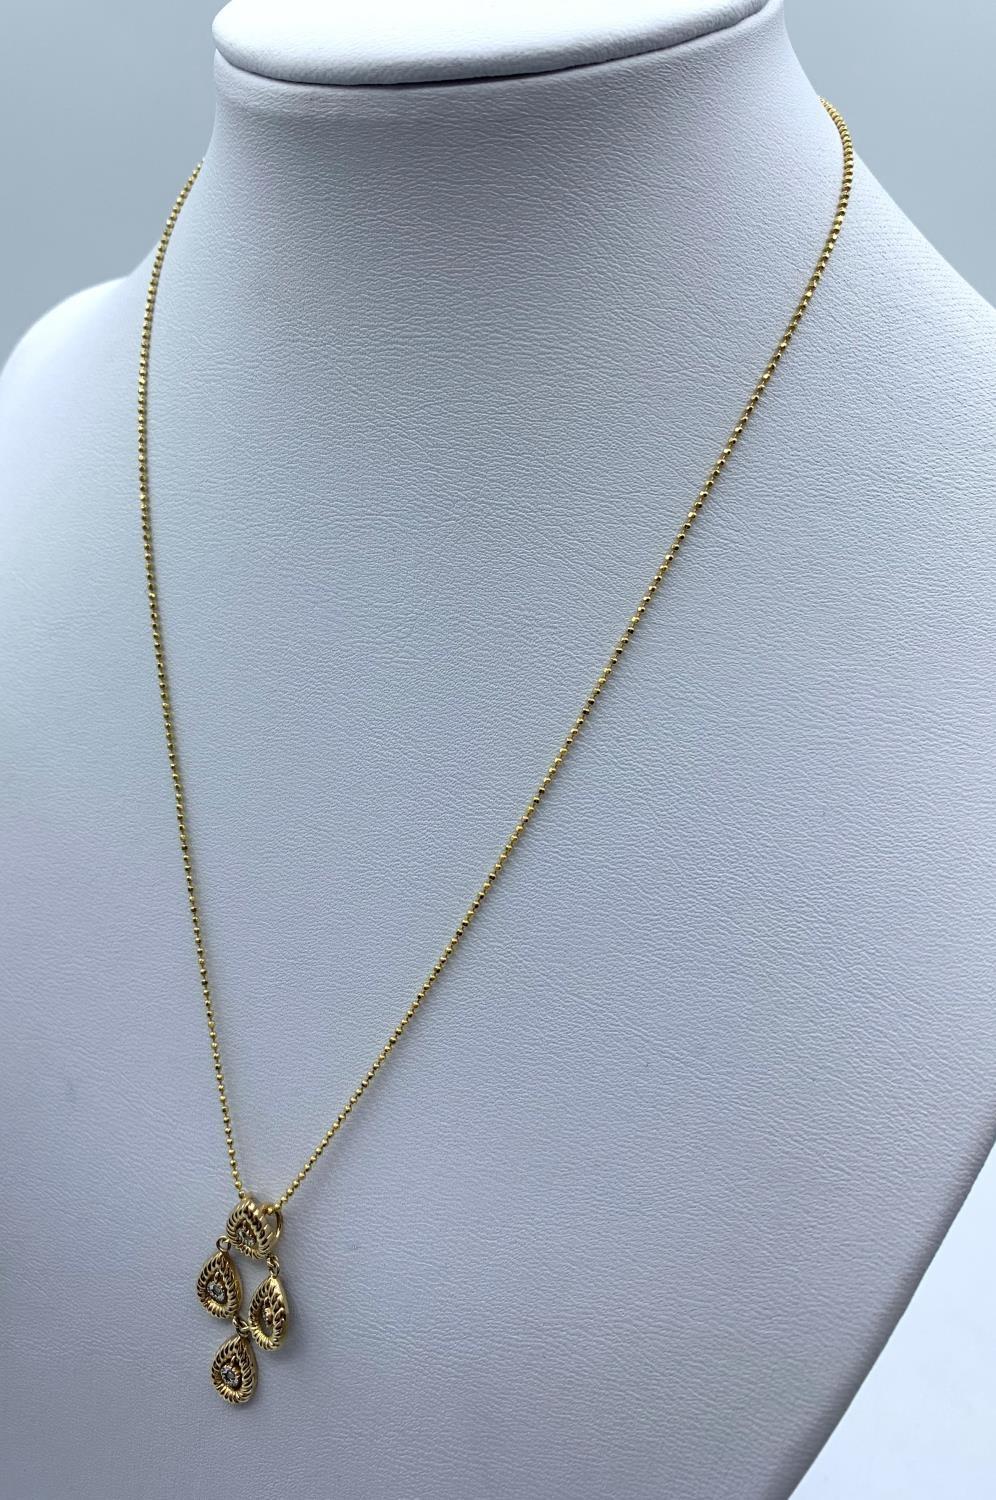 Diamond Drop Pendant in 18K Gold on a 9K Gold Chain, weight 3.1g and 36cm long chain - Image 3 of 4